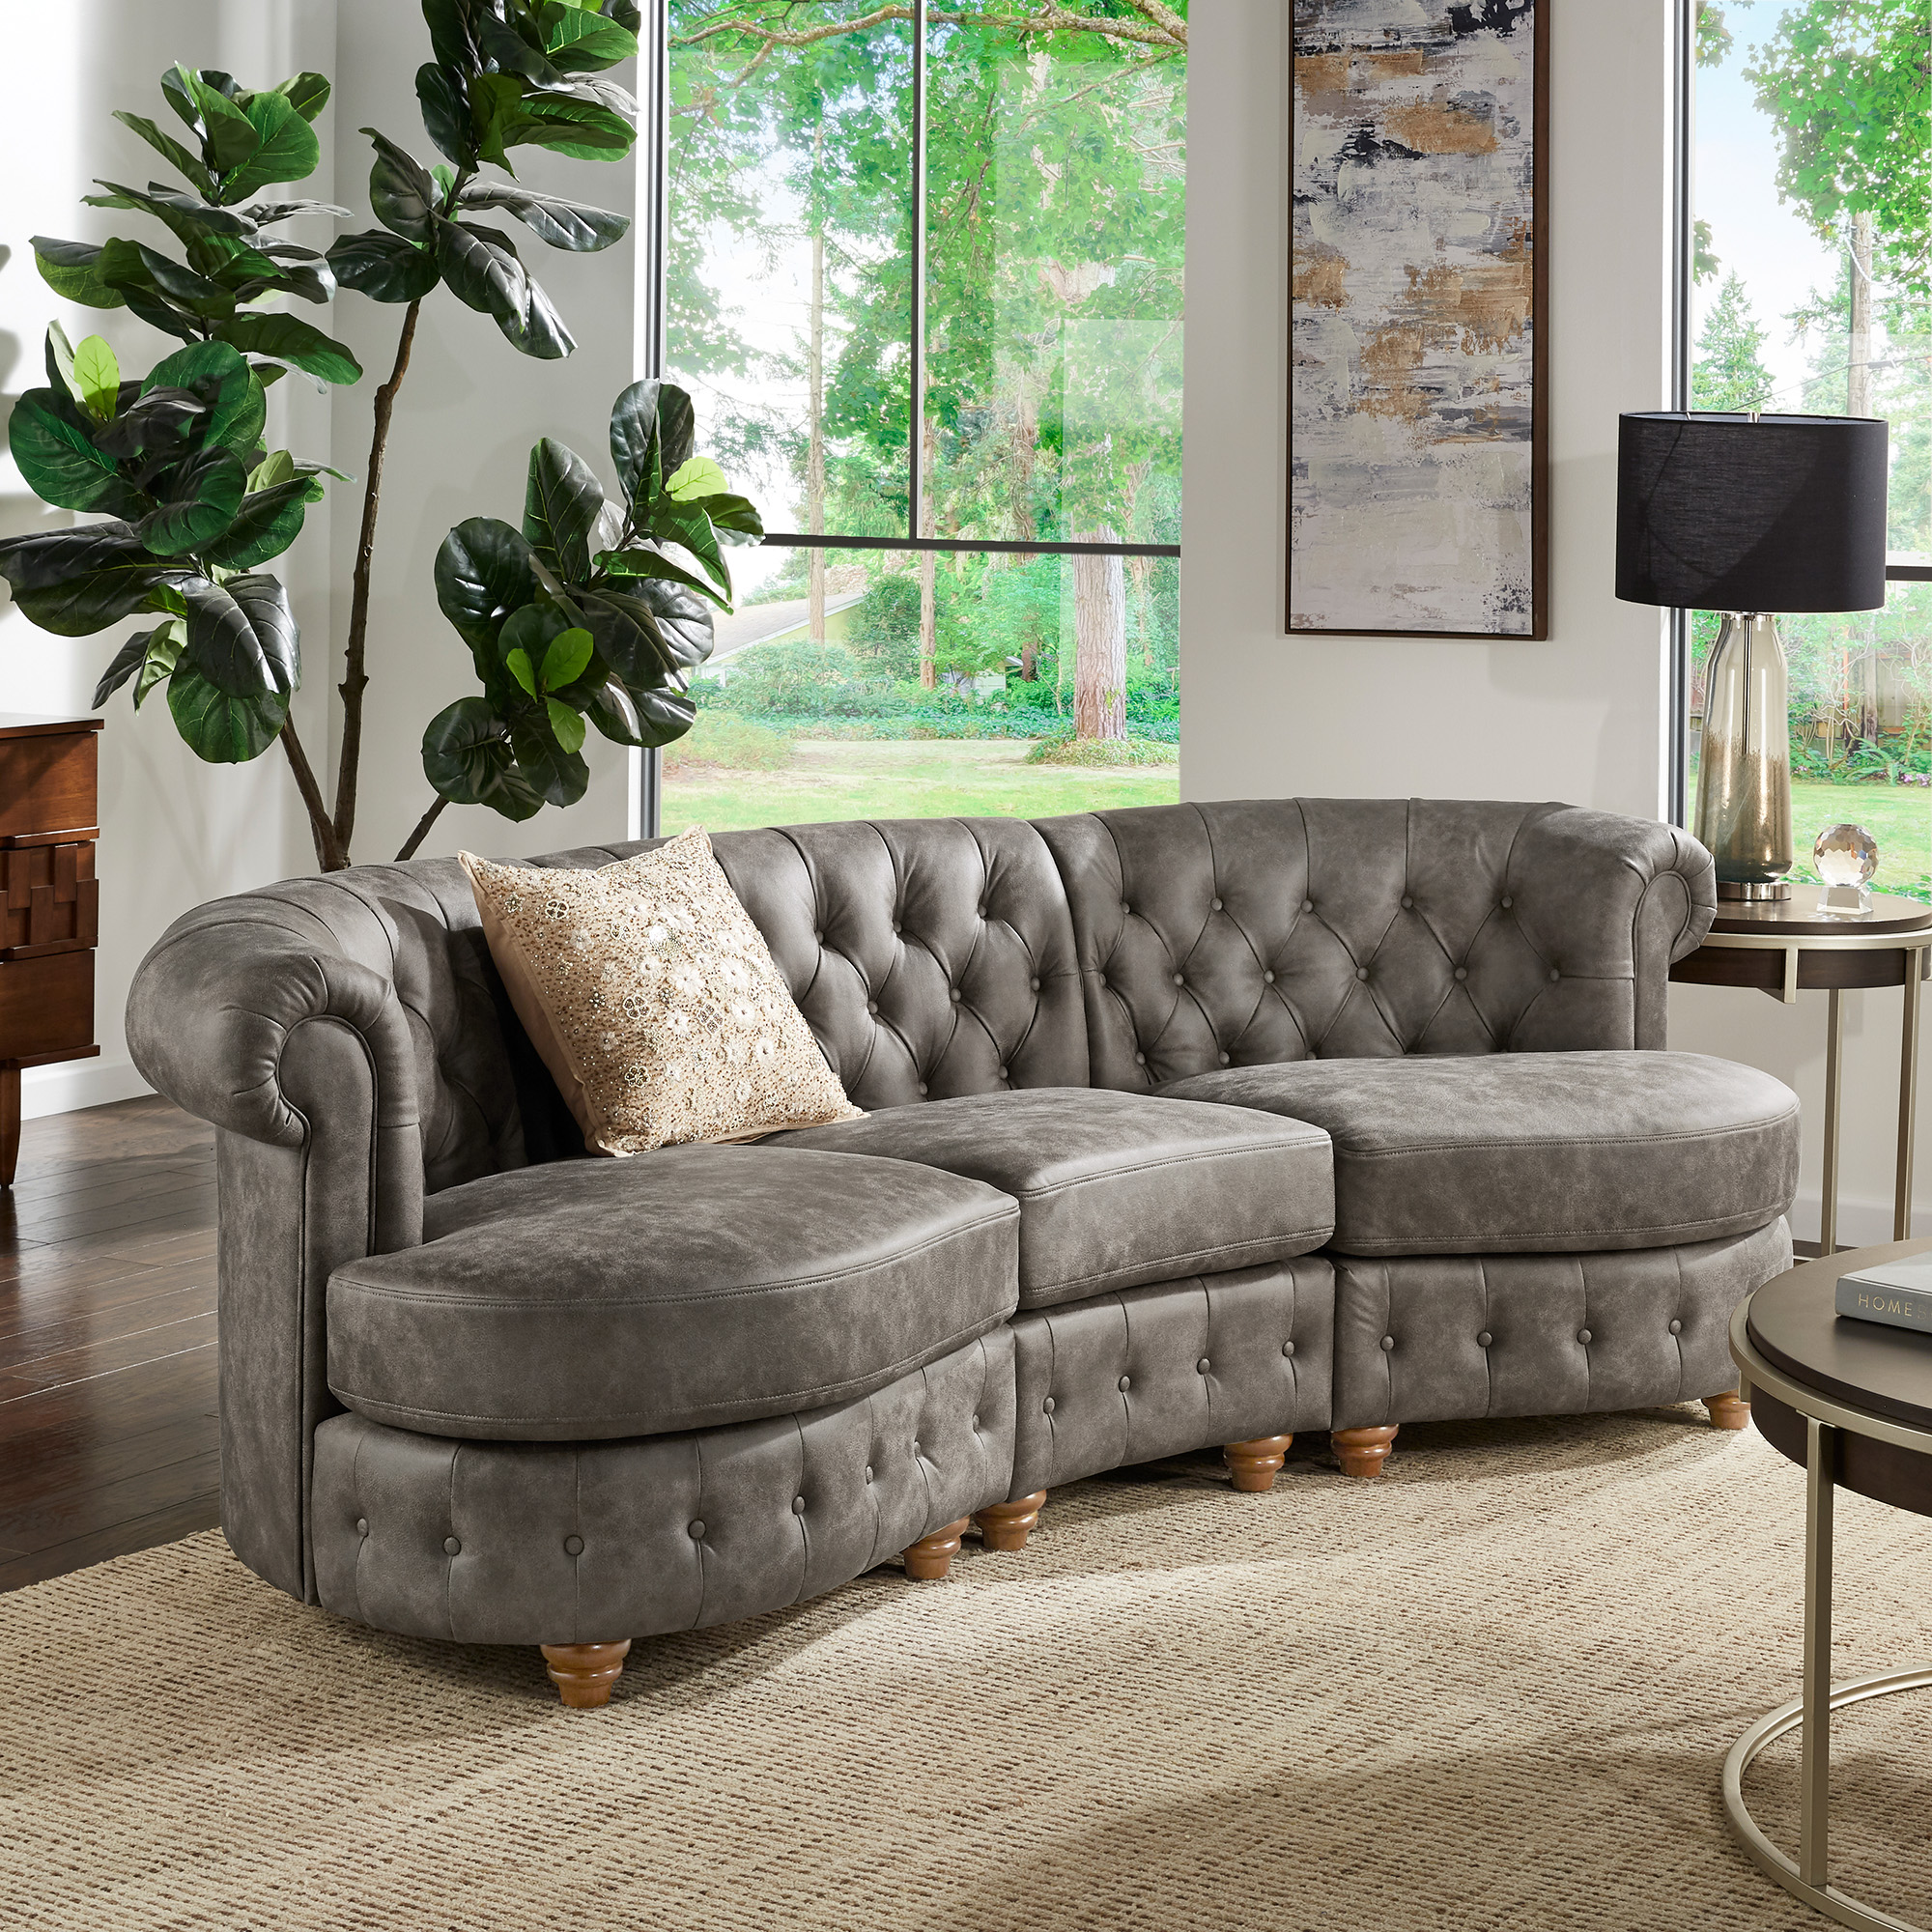 Tufted Scroll Arm Chesterfield Curved Sofa